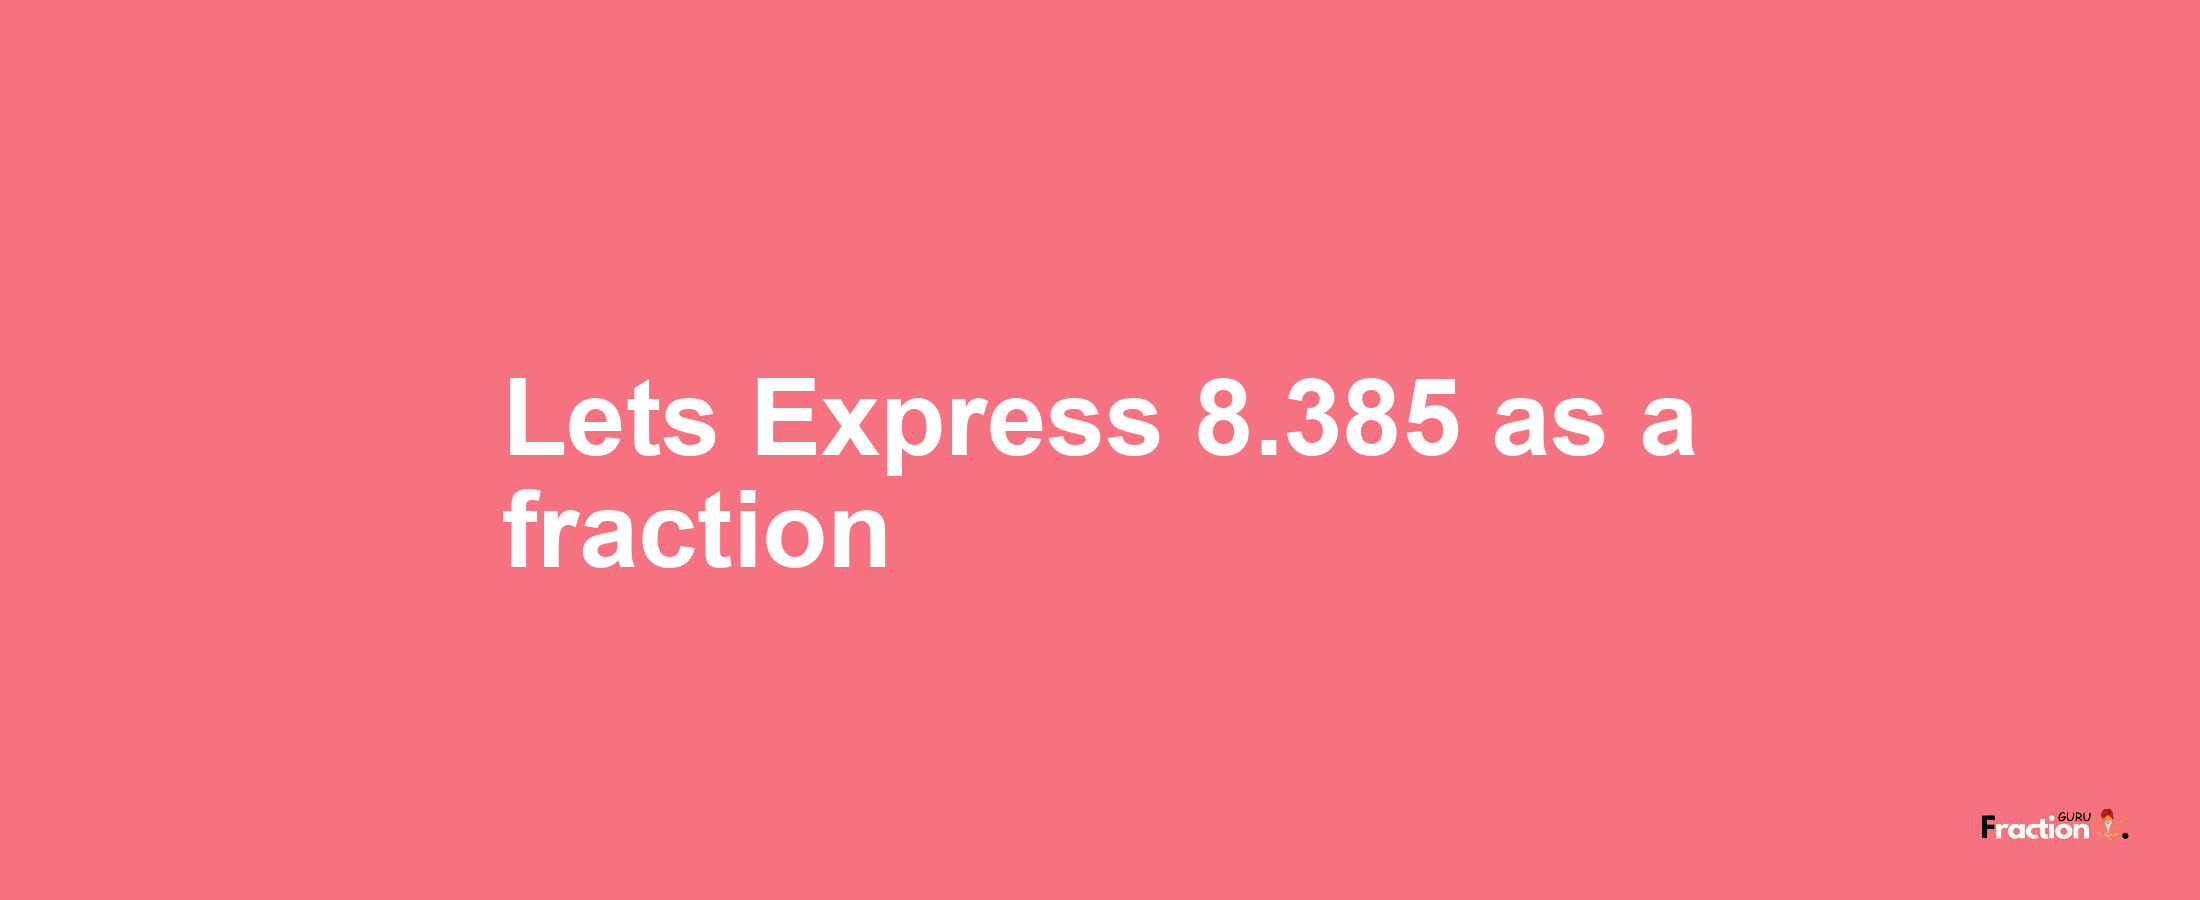 Lets Express 8.385 as afraction